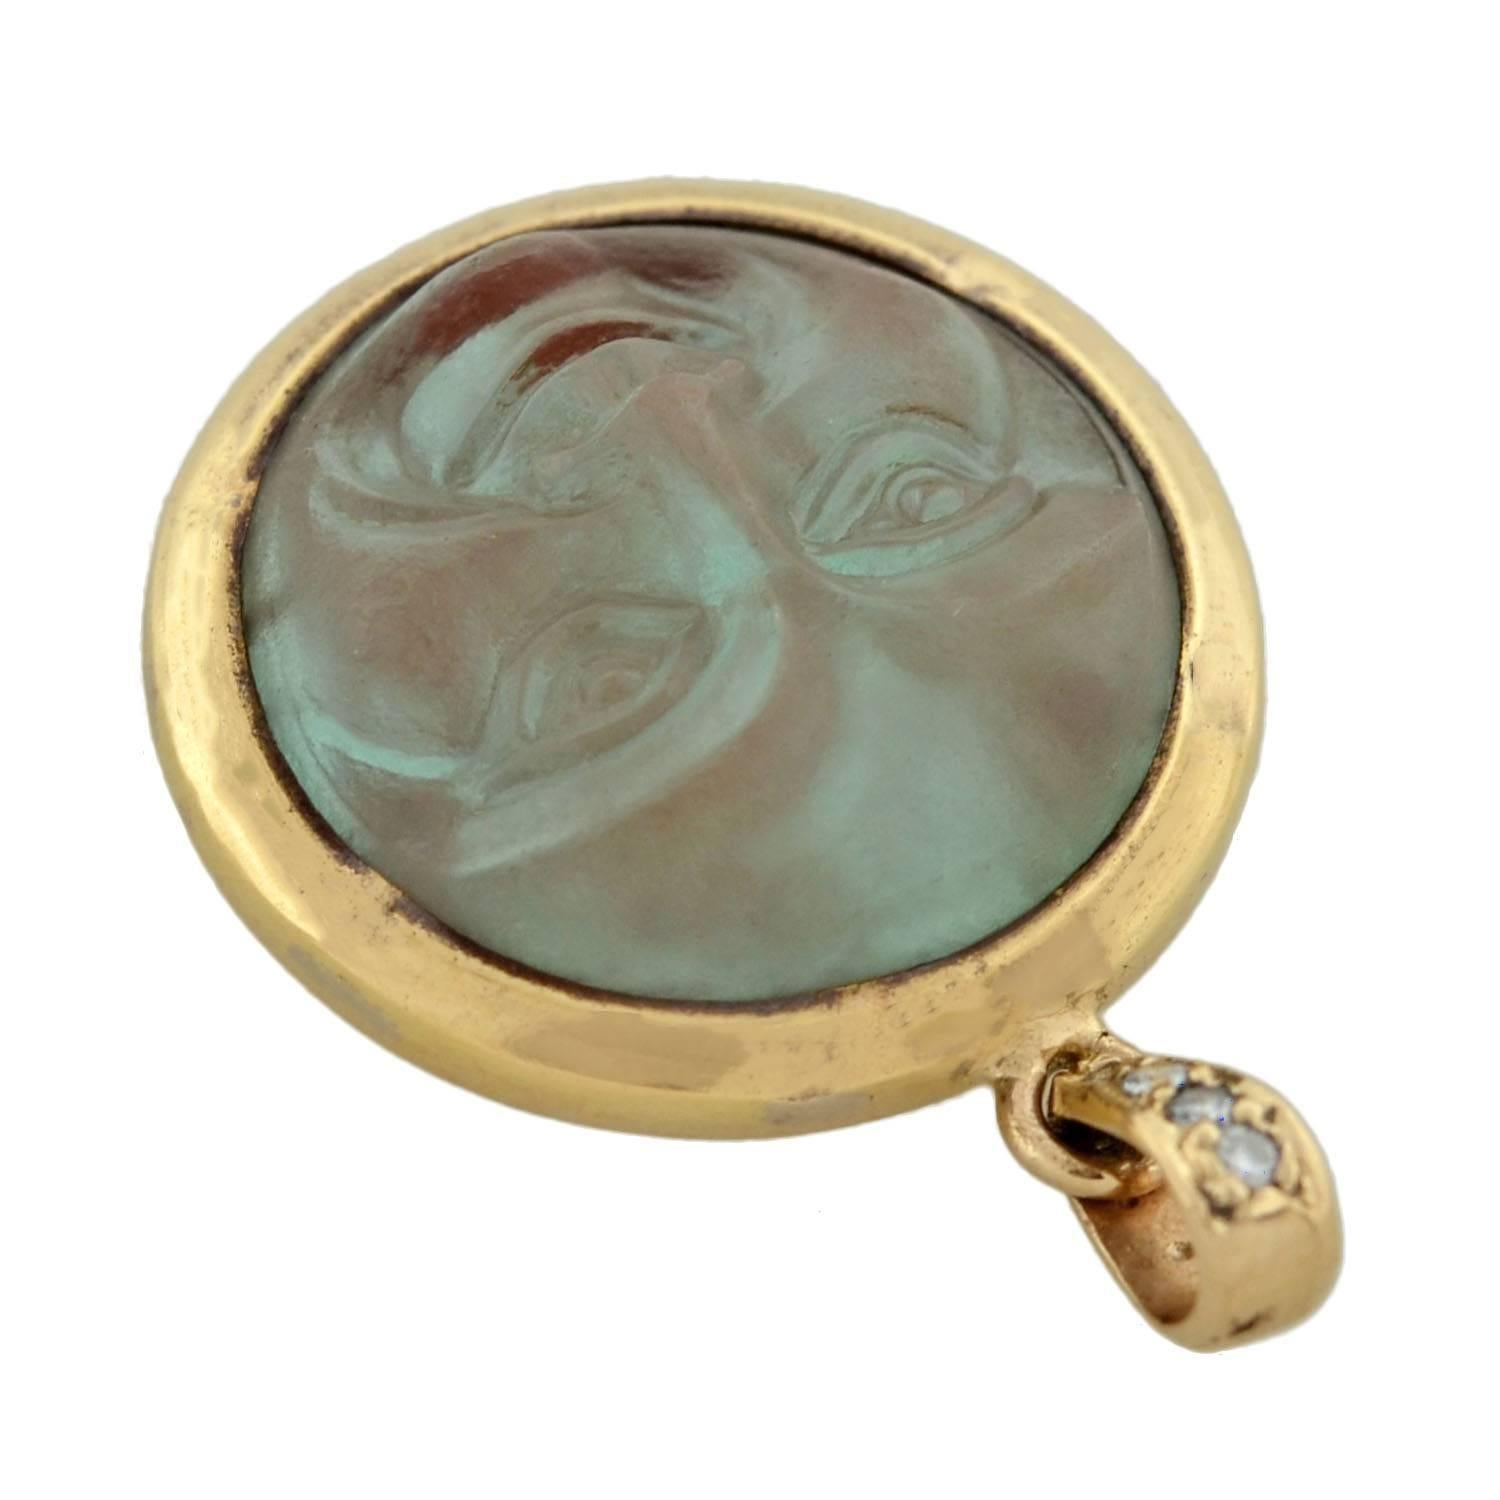 A wonderful "Man in the Moon" pendant from the Victorian (ca1880) era! This whimsical piece is crafted in 14kt yellow gold and features an alluring carved art glass center. The design portrays a recognizable "Man in the Moon"